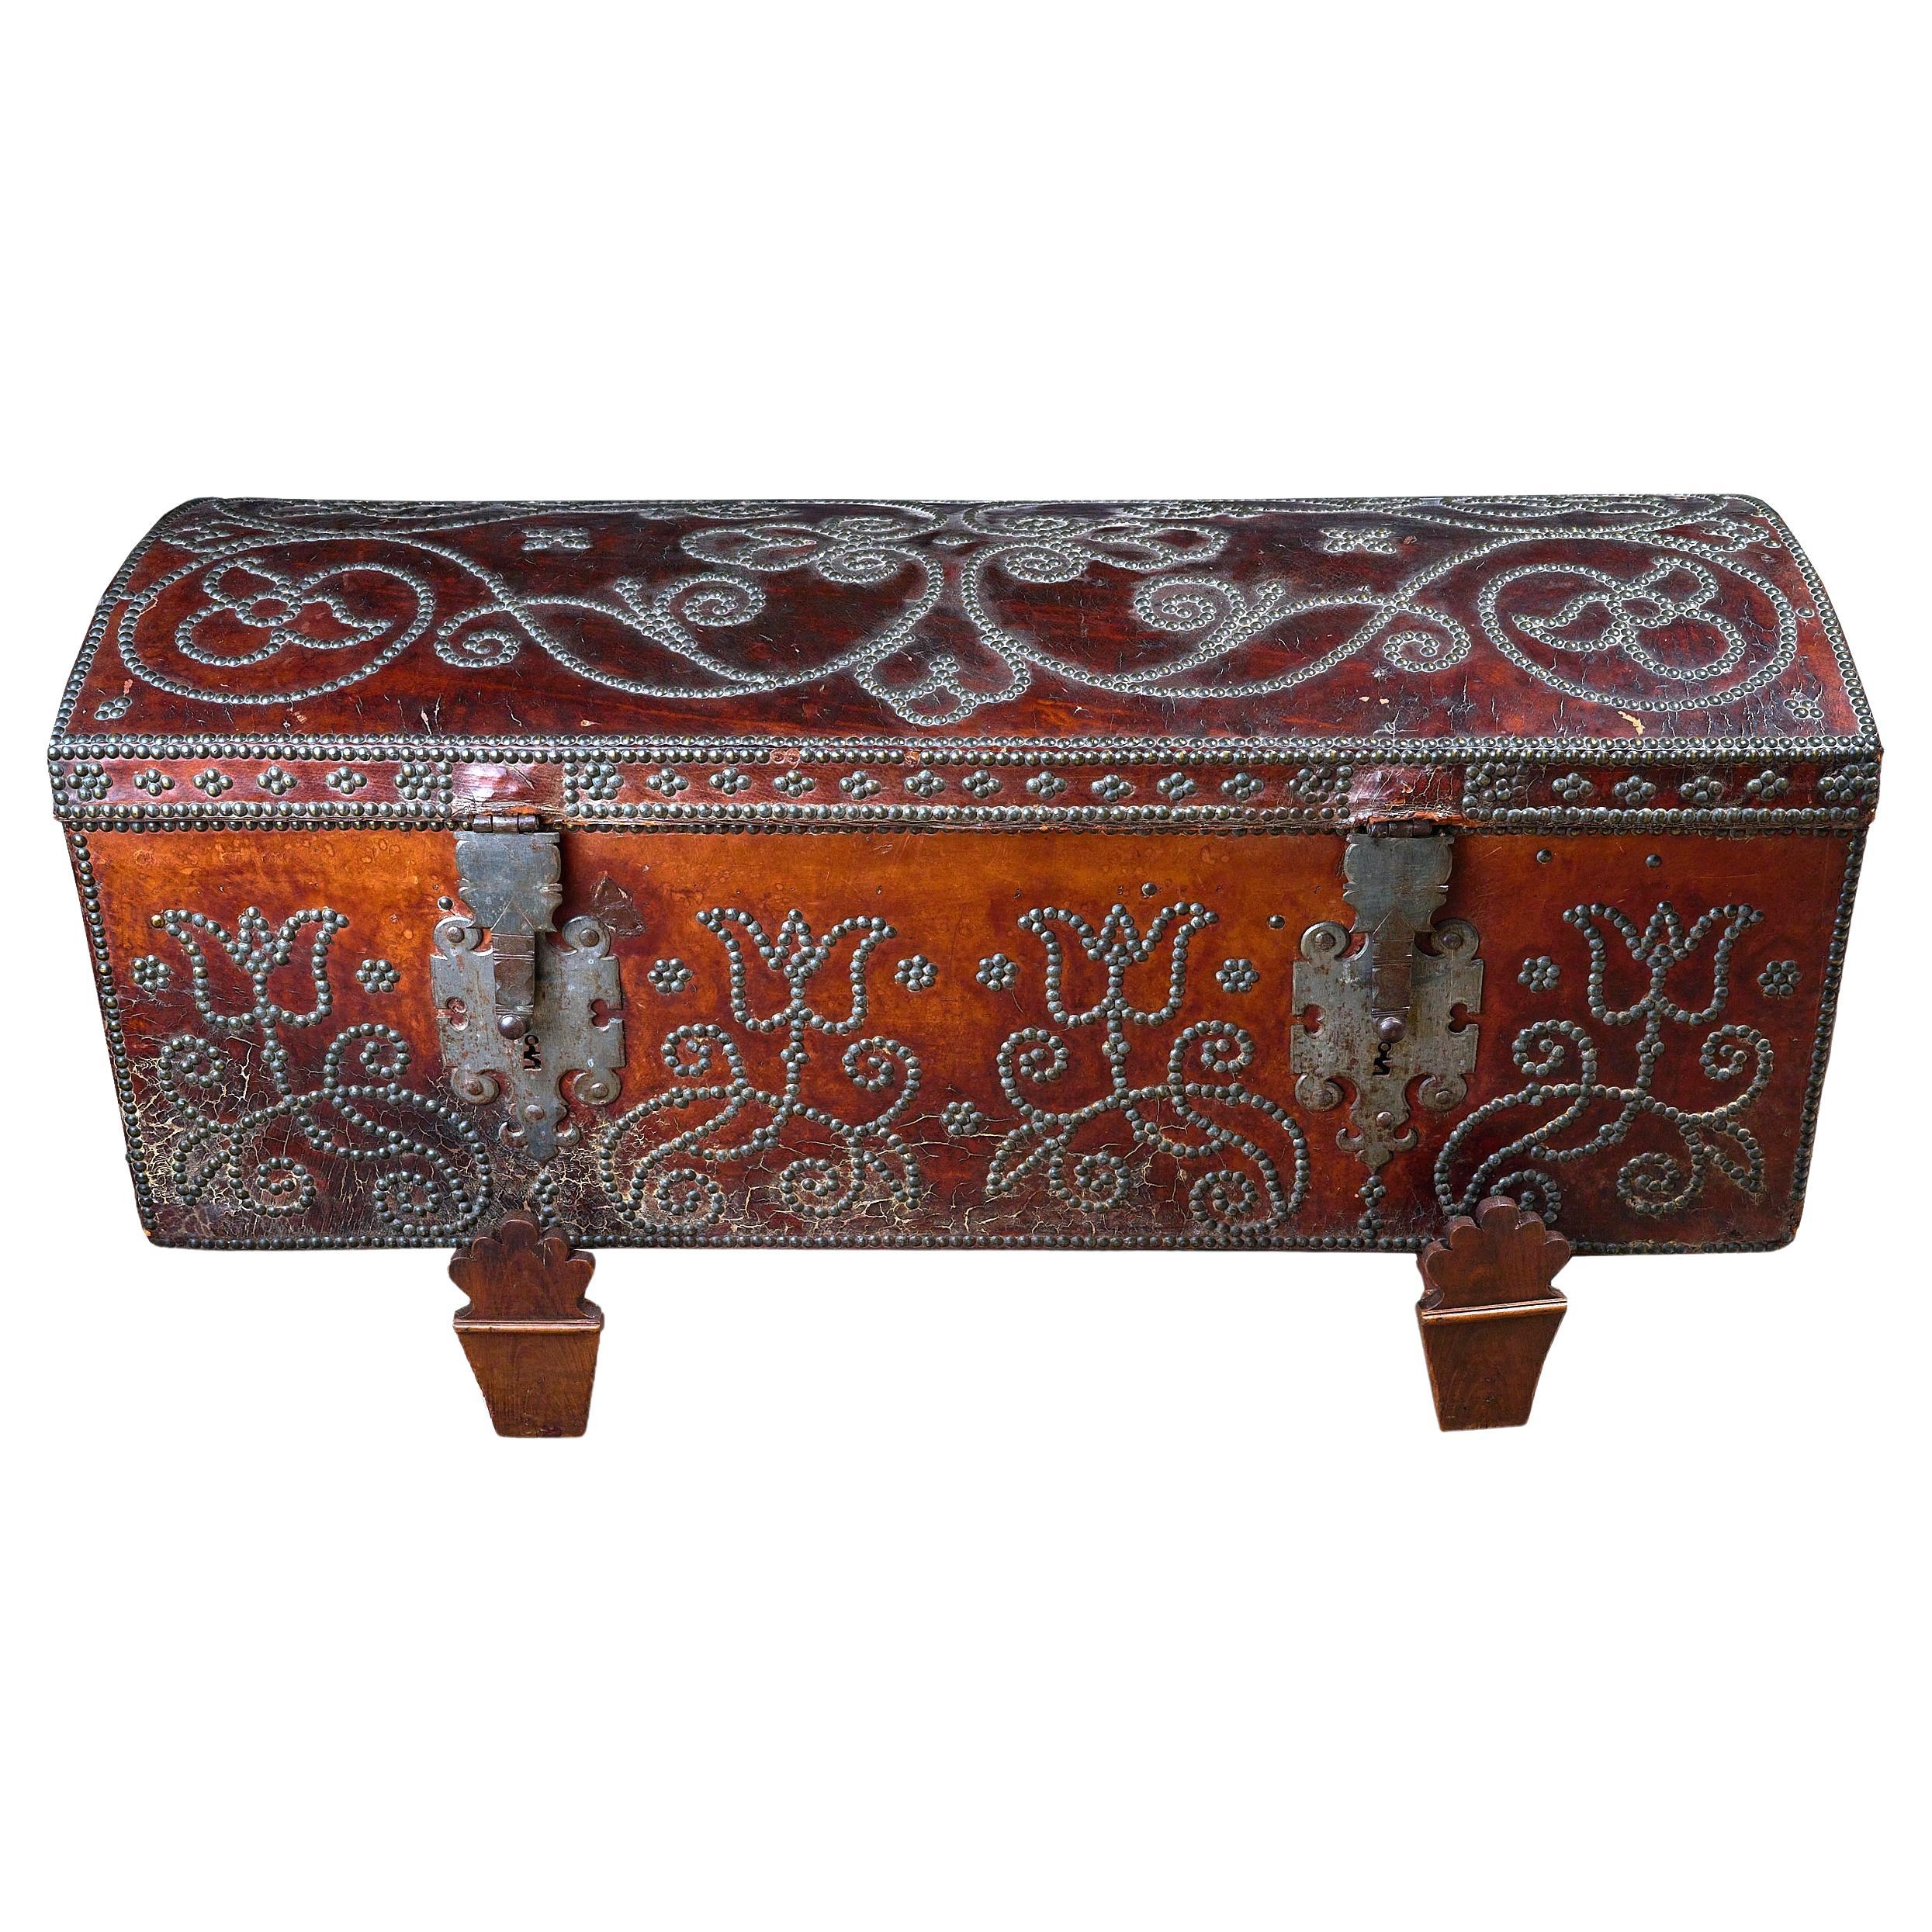 Spanish Leather and Studded Decorative Trunk on Original Stand For Sale